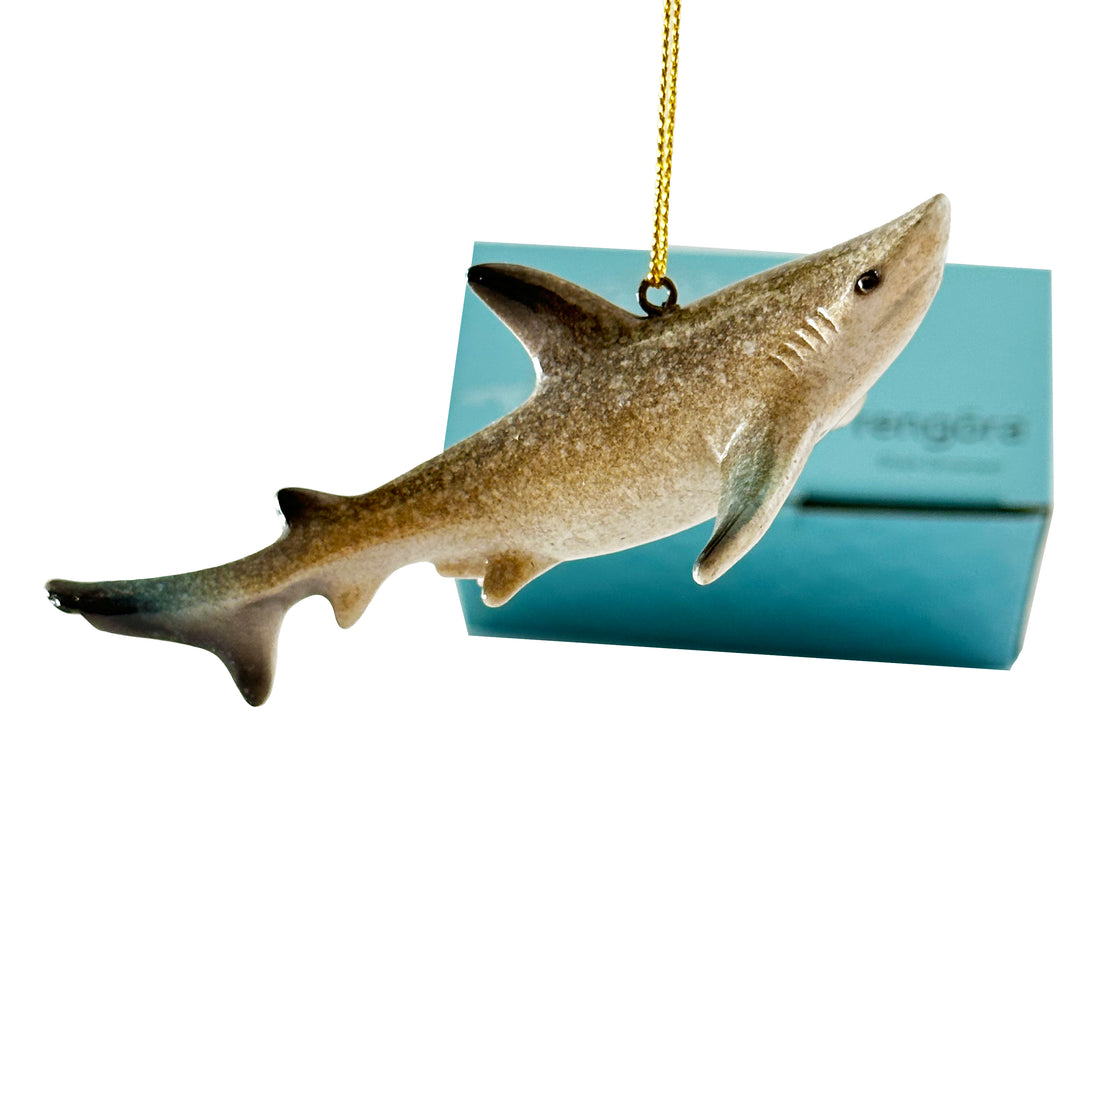 A rengöra shark ornament dangles from a Christmas tree, seen from a side perspective, with its dedicated packaging in the background against a softly blurred plain white backdrop